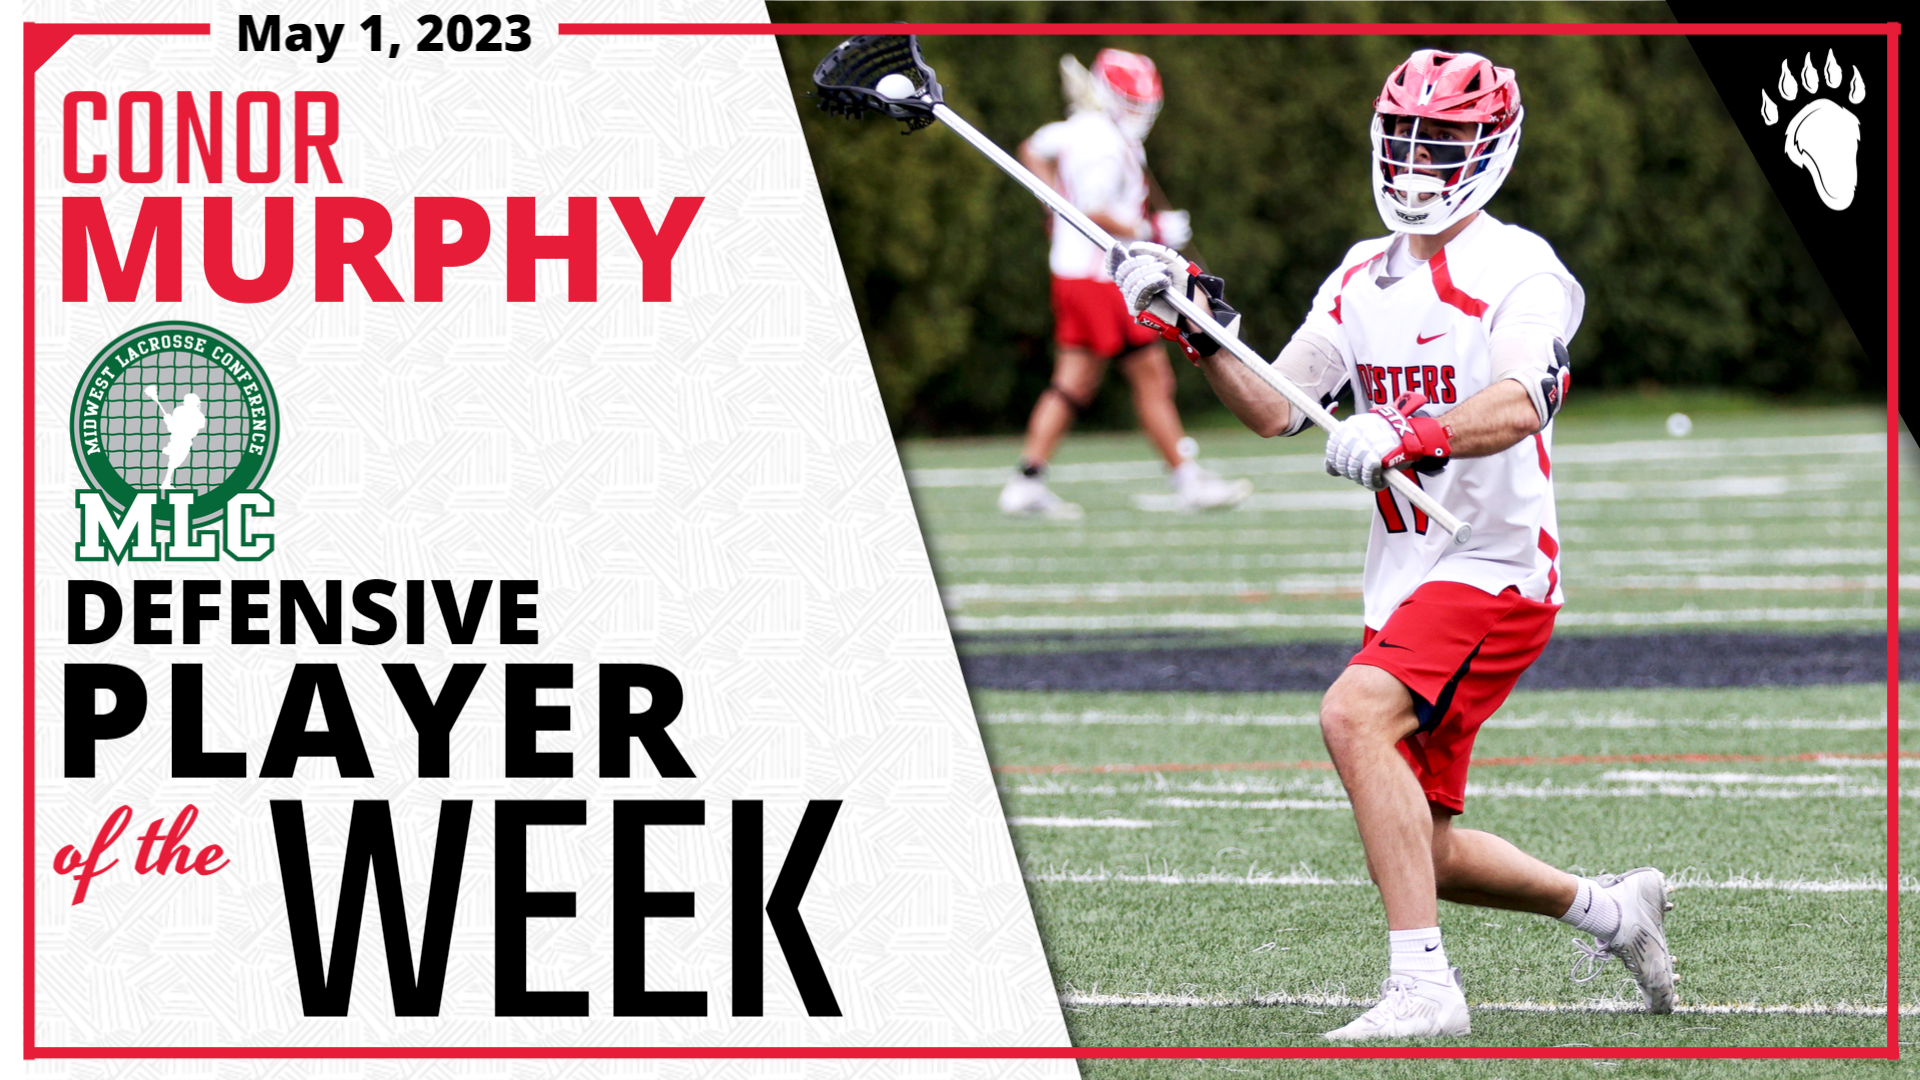 Conor Murphy Named MLC Defensive Player of the Week